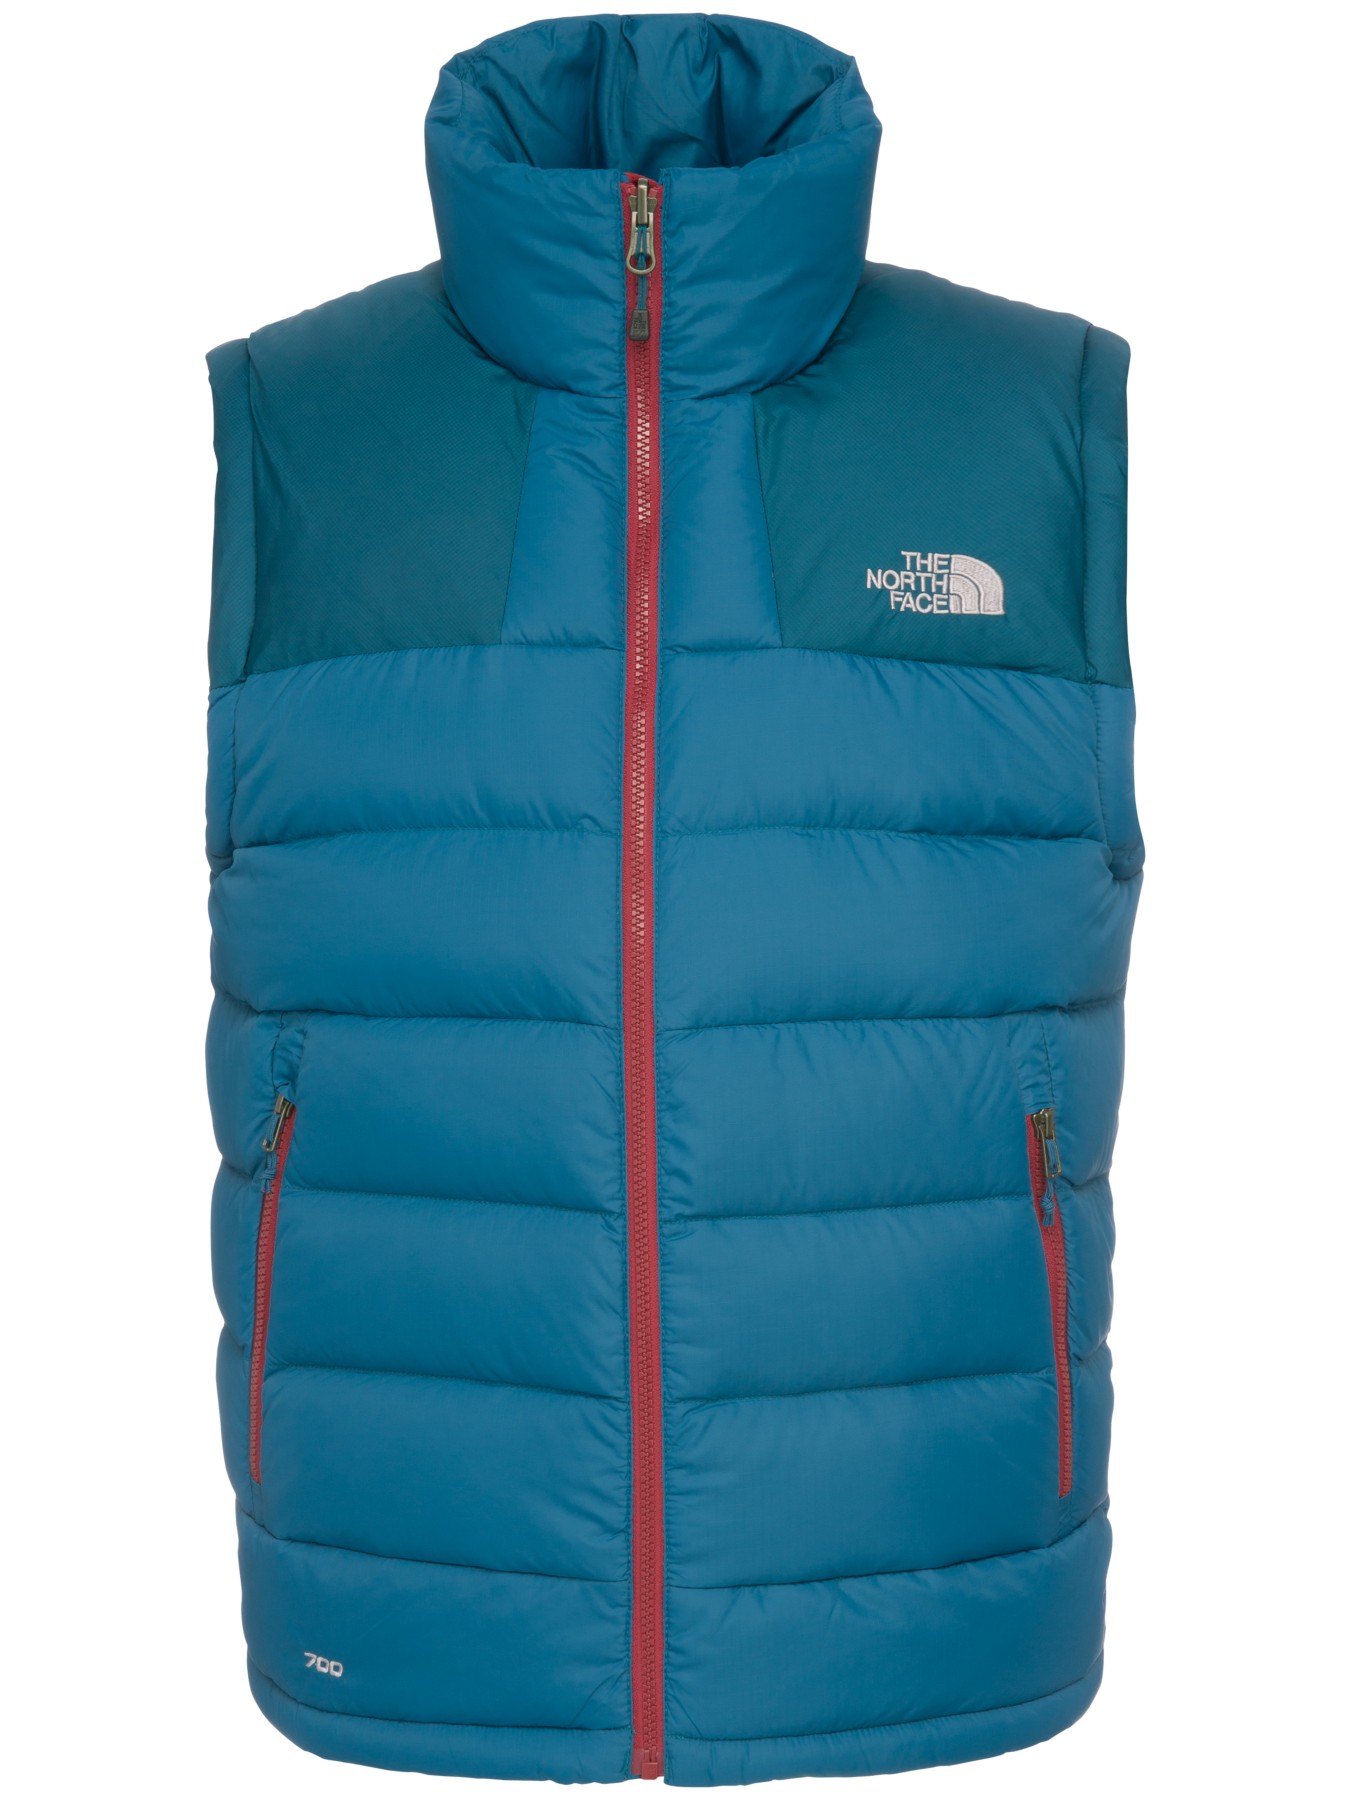 The North Face Massif Gilet in Black (Blue) for Men - Lyst